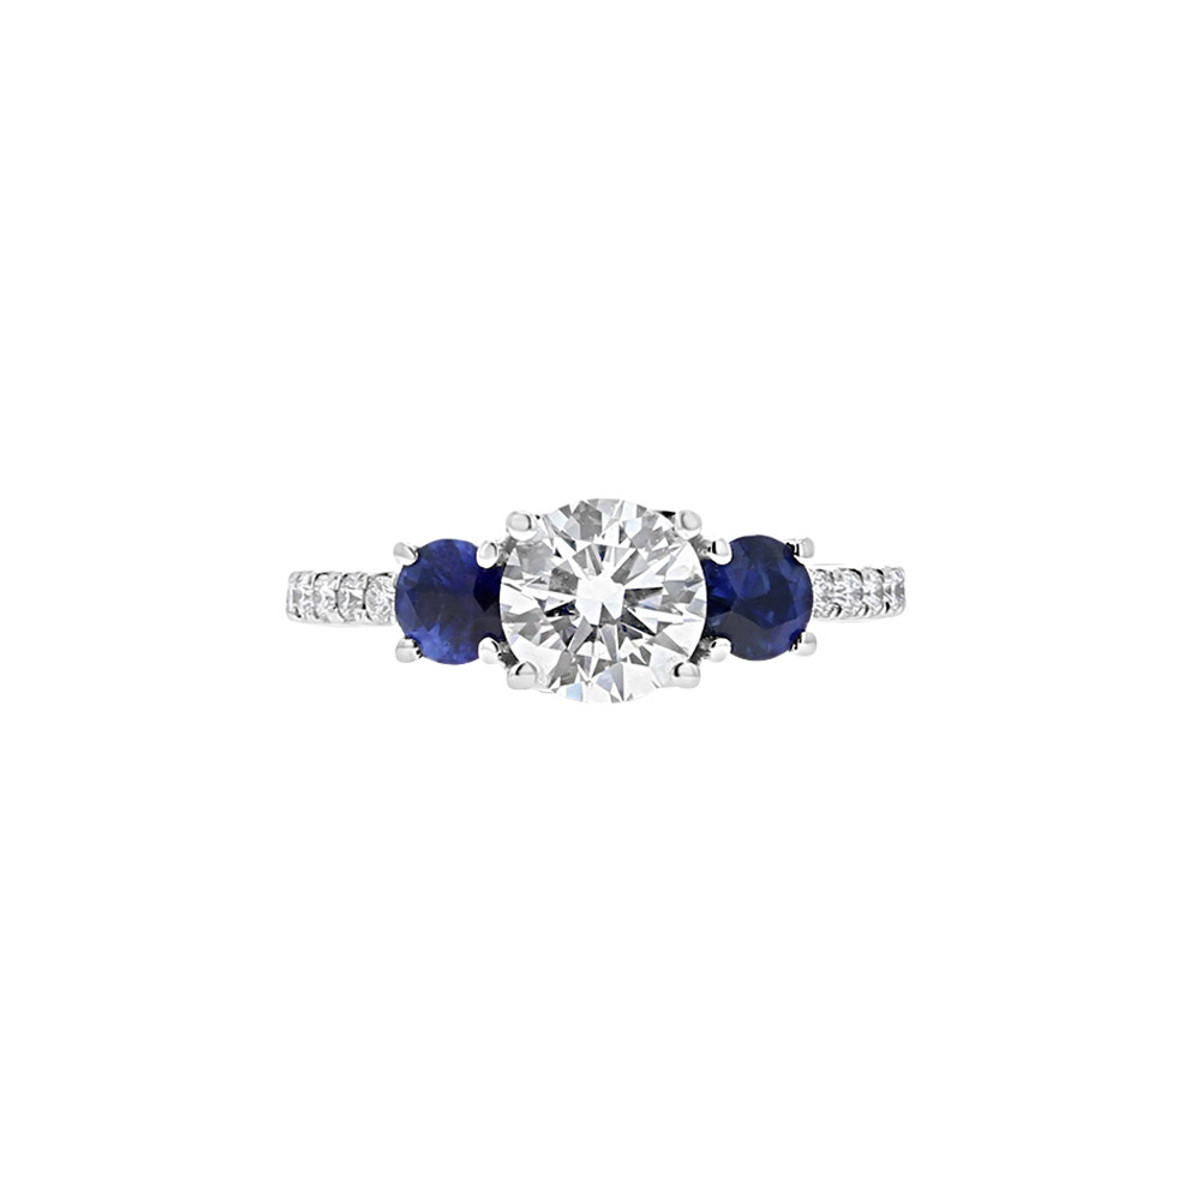 Engage By Hyde Park 18K White Gold, Sapphire & Diamond Three Stone Engagement Ring-DSCRD0500